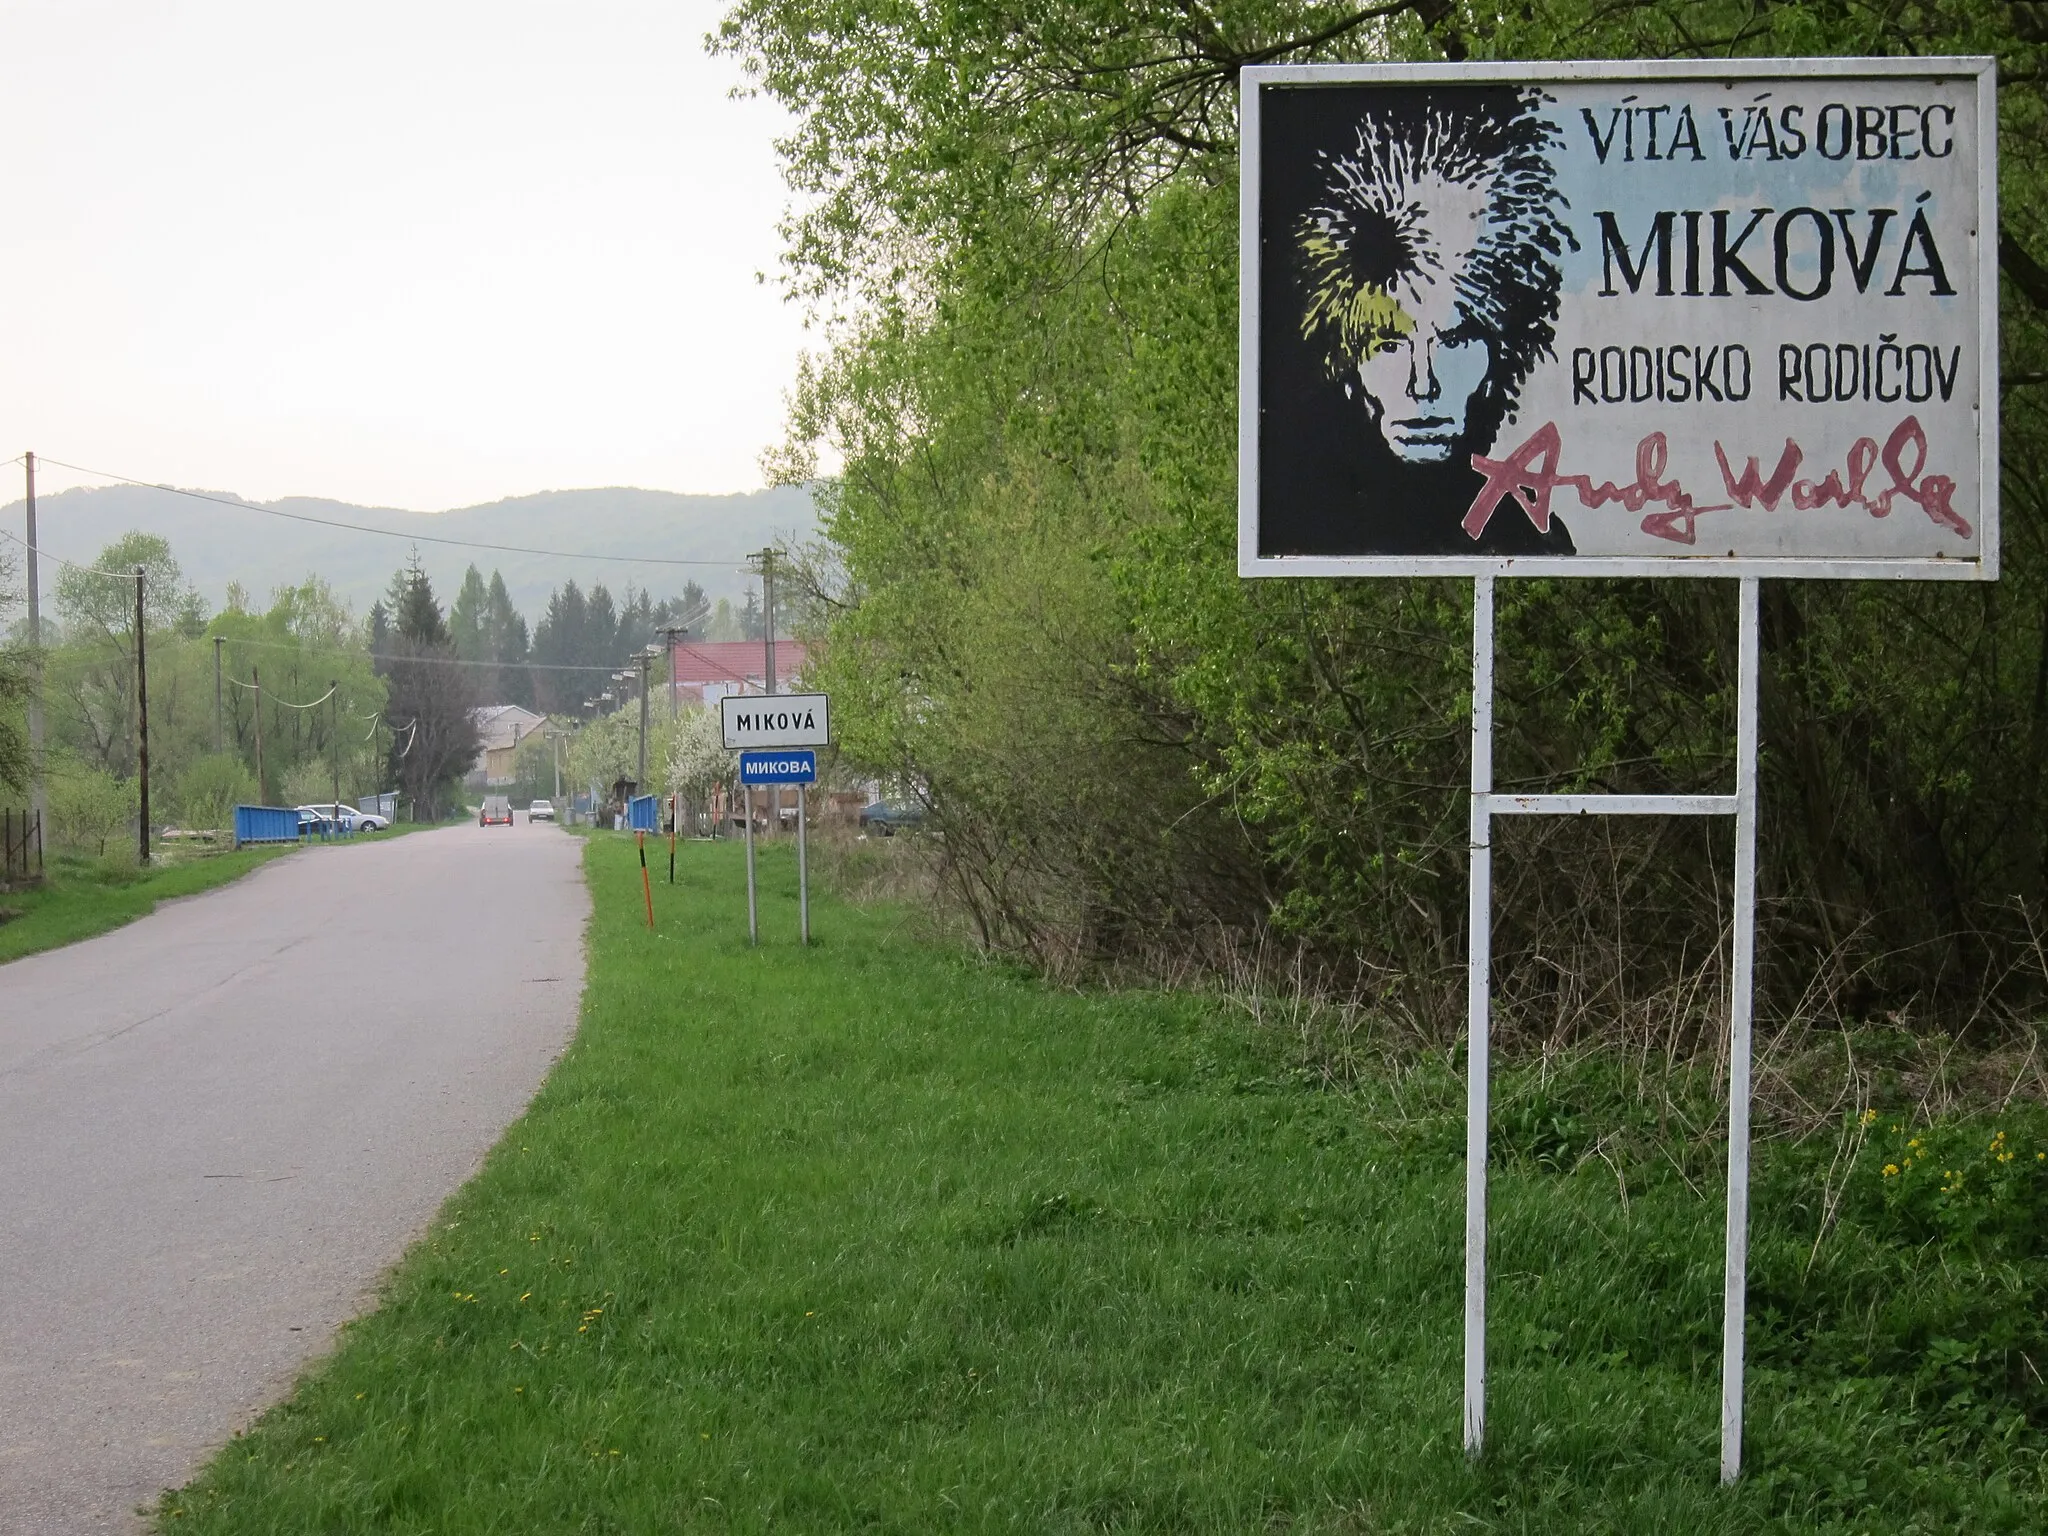 Photo showing: Miková, Slovakia – the motherland of Andy Warhol’s parents